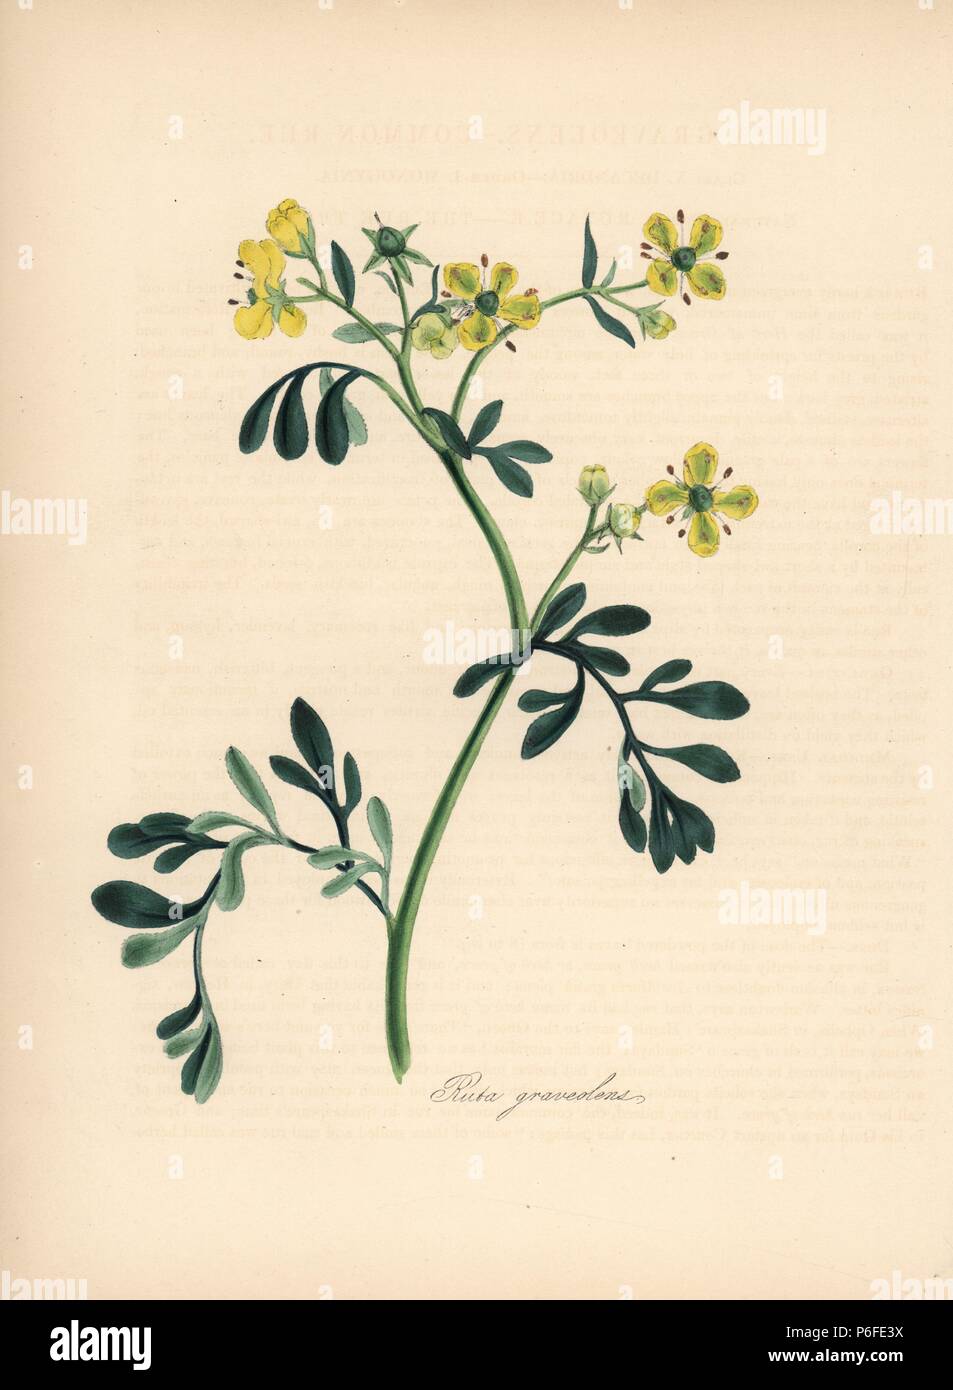 Common rue, Ruta graveolens. Handcoloured zincograph by C. Chabot drawn by Miss M. A. Burnett from her 'Plantae Utiliores: or Illustrations of Useful Plants,' Whittaker, London, 1842. Miss Burnett drew the botanical illustrations, but the text was chiefly by her late brother, British botanist Gilbert Thomas Burnett (1800-1835). Stock Photo